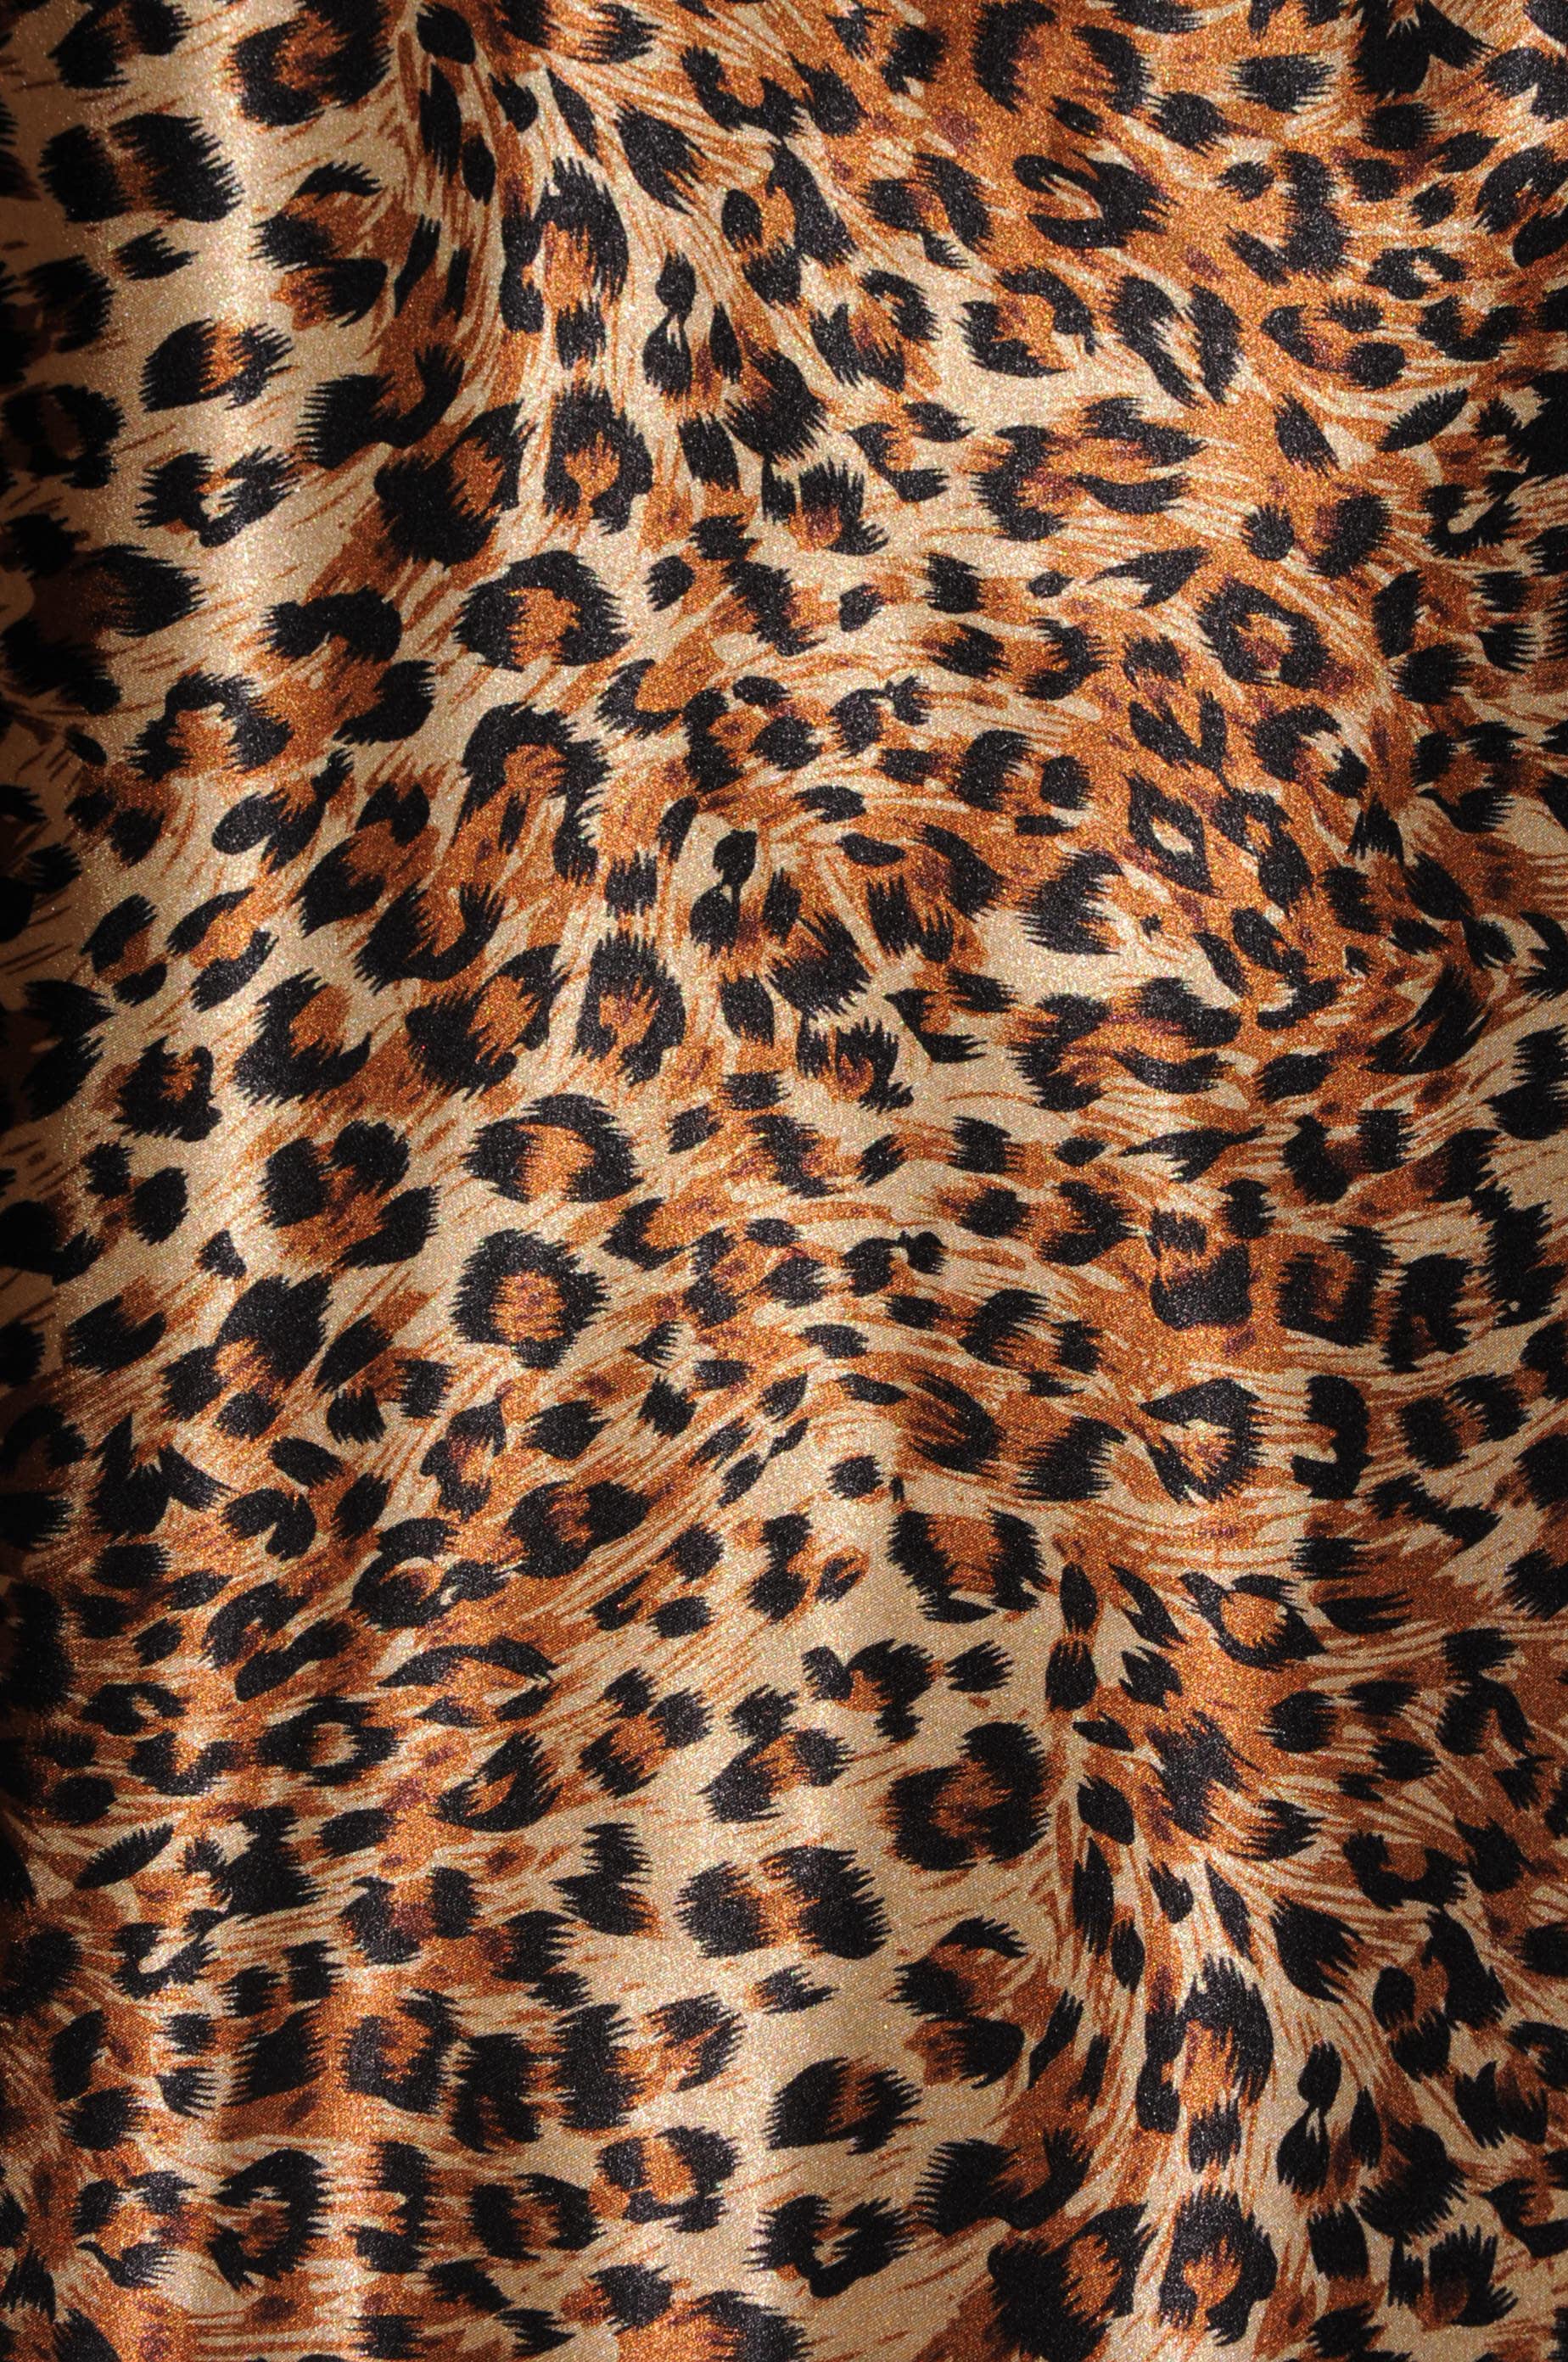 Cheetah Print Fabric 100% Cotton Animal Spots 58/60 Wide Sold BTY